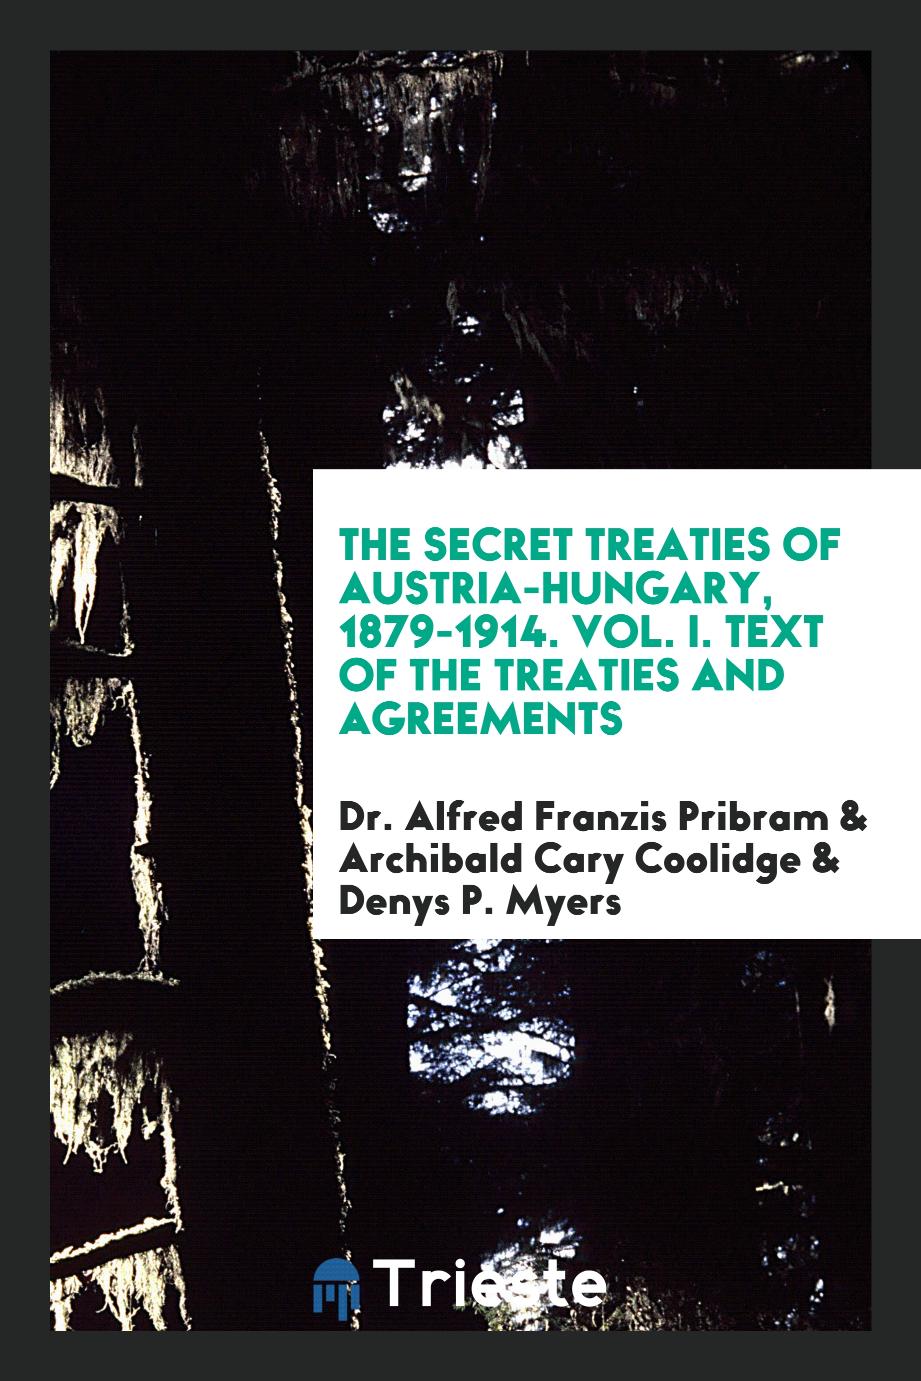 The Secret Treaties of Austria-Hungary, 1879-1914. Vol. I. Text of the Treaties and Agreements